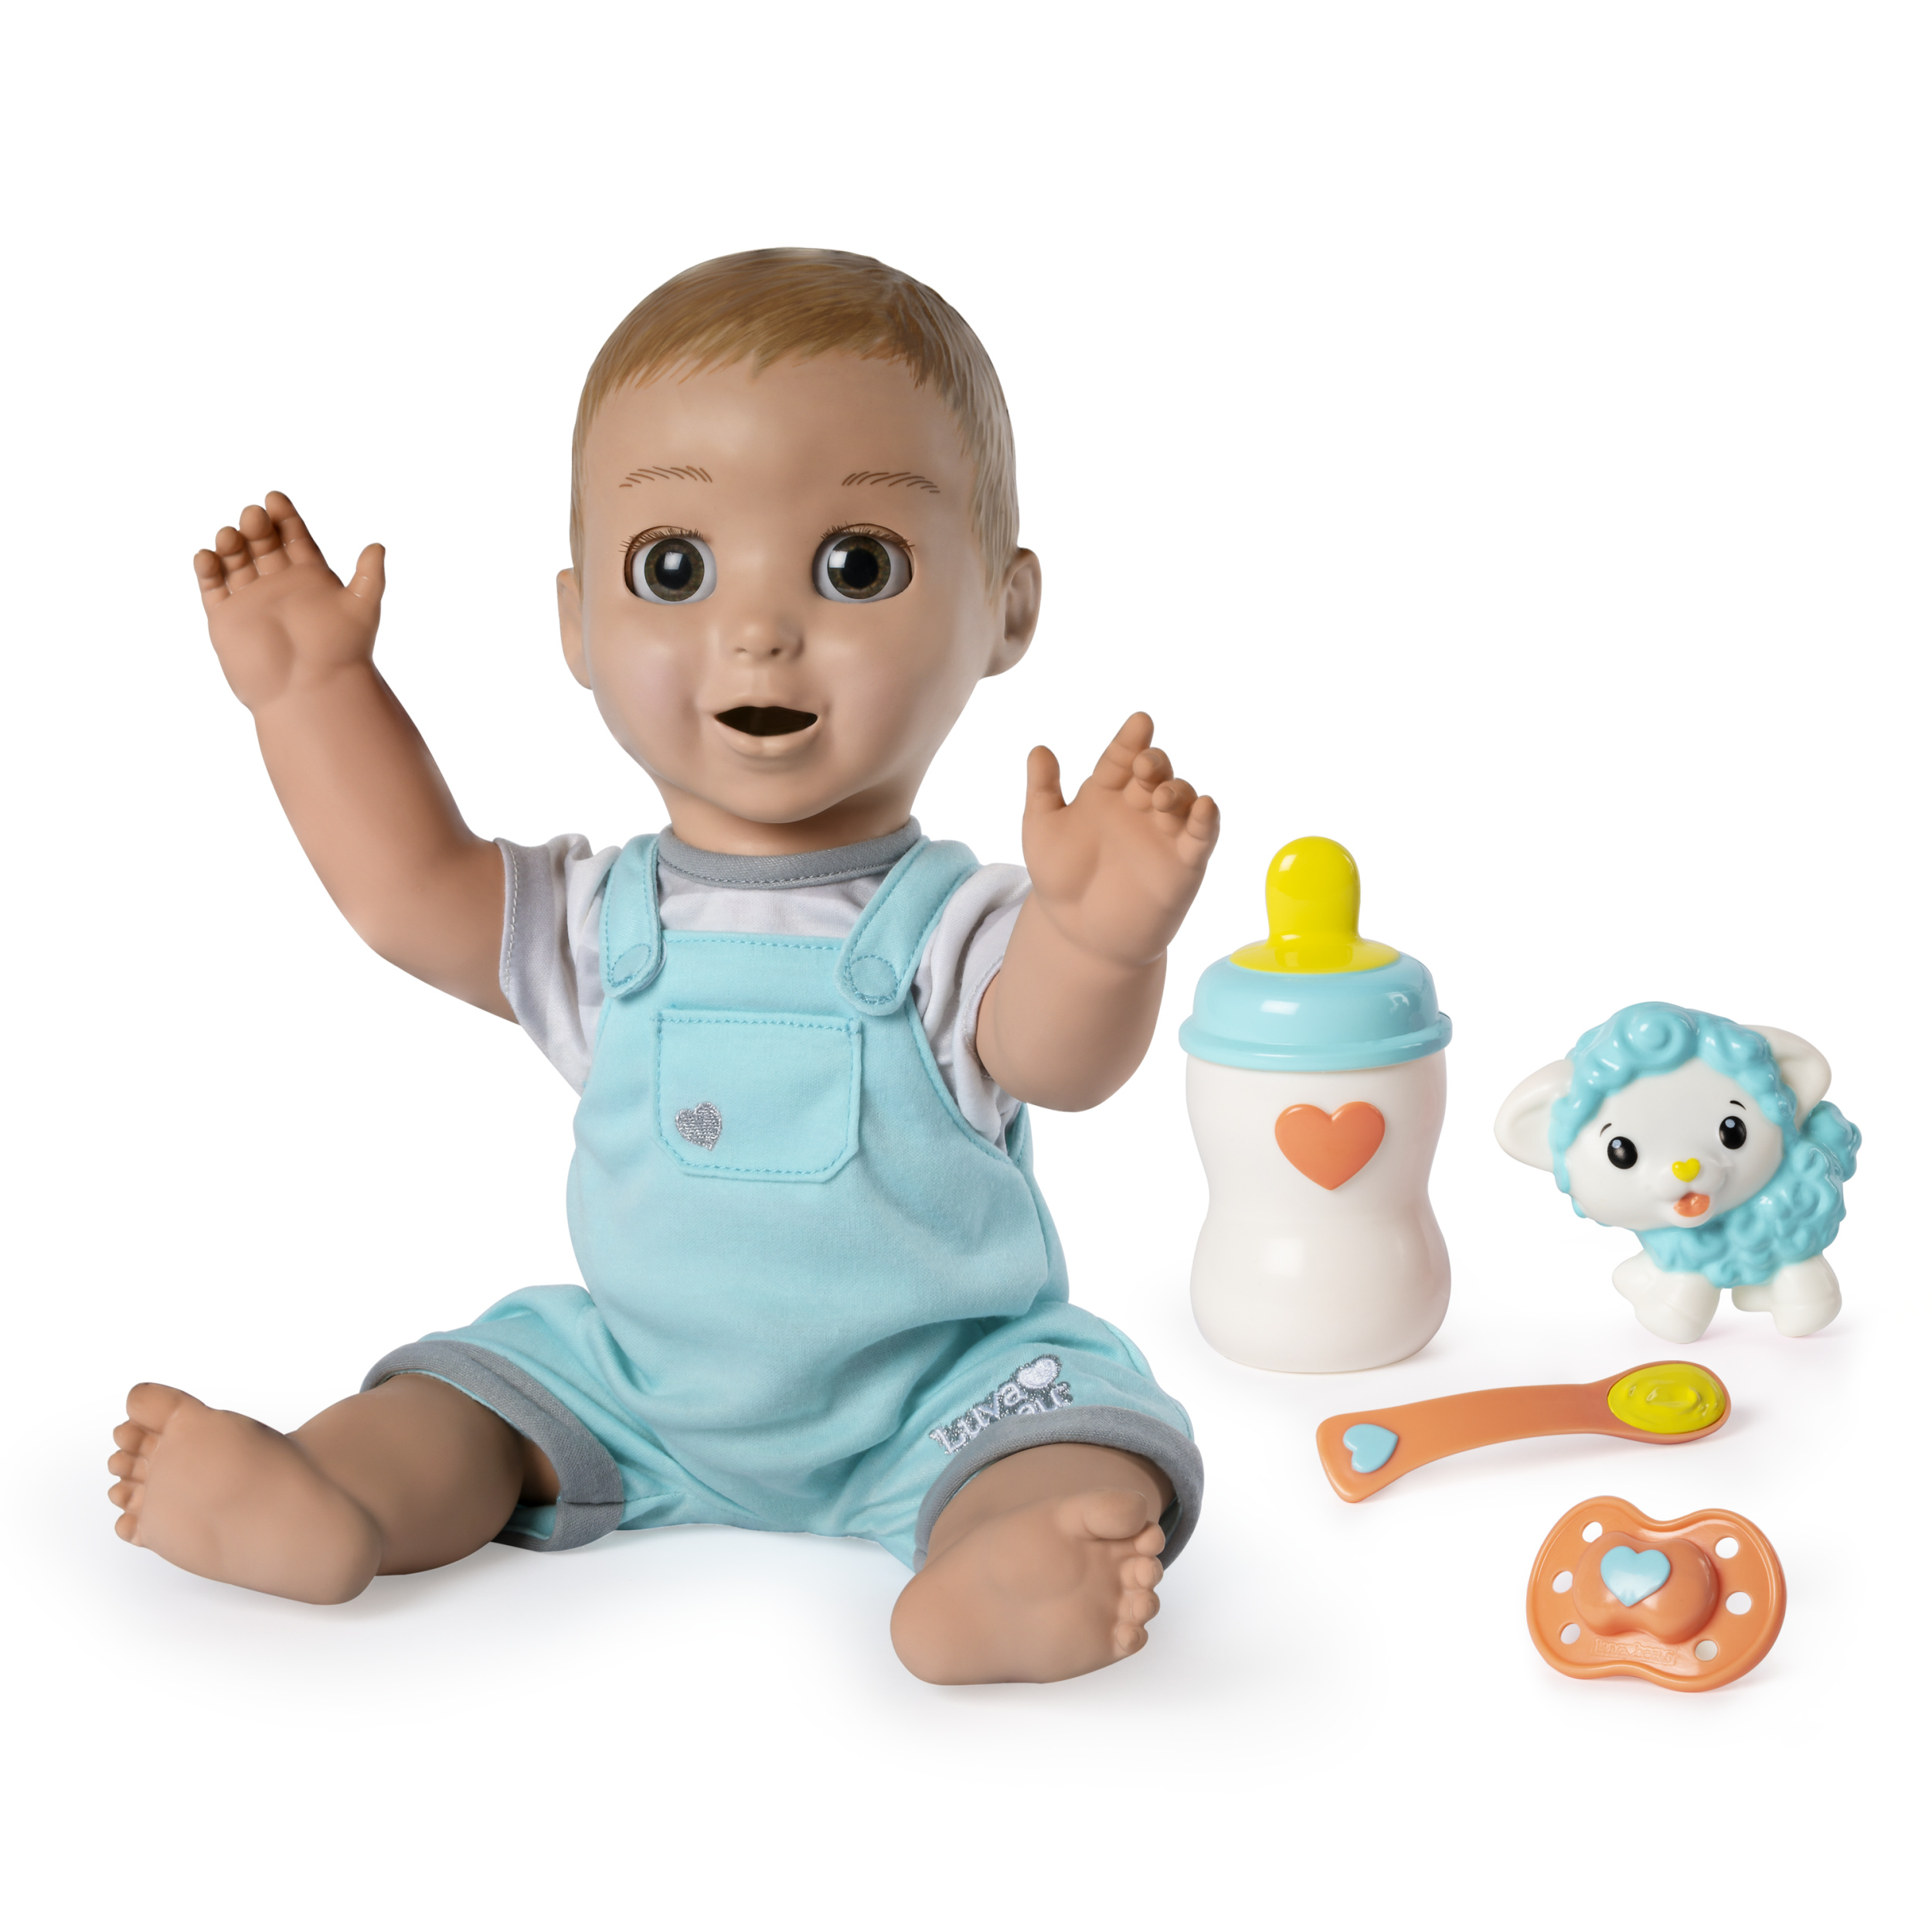 Luvabeau, Interactive Baby Doll for ages 4 and up - image 1 of 9